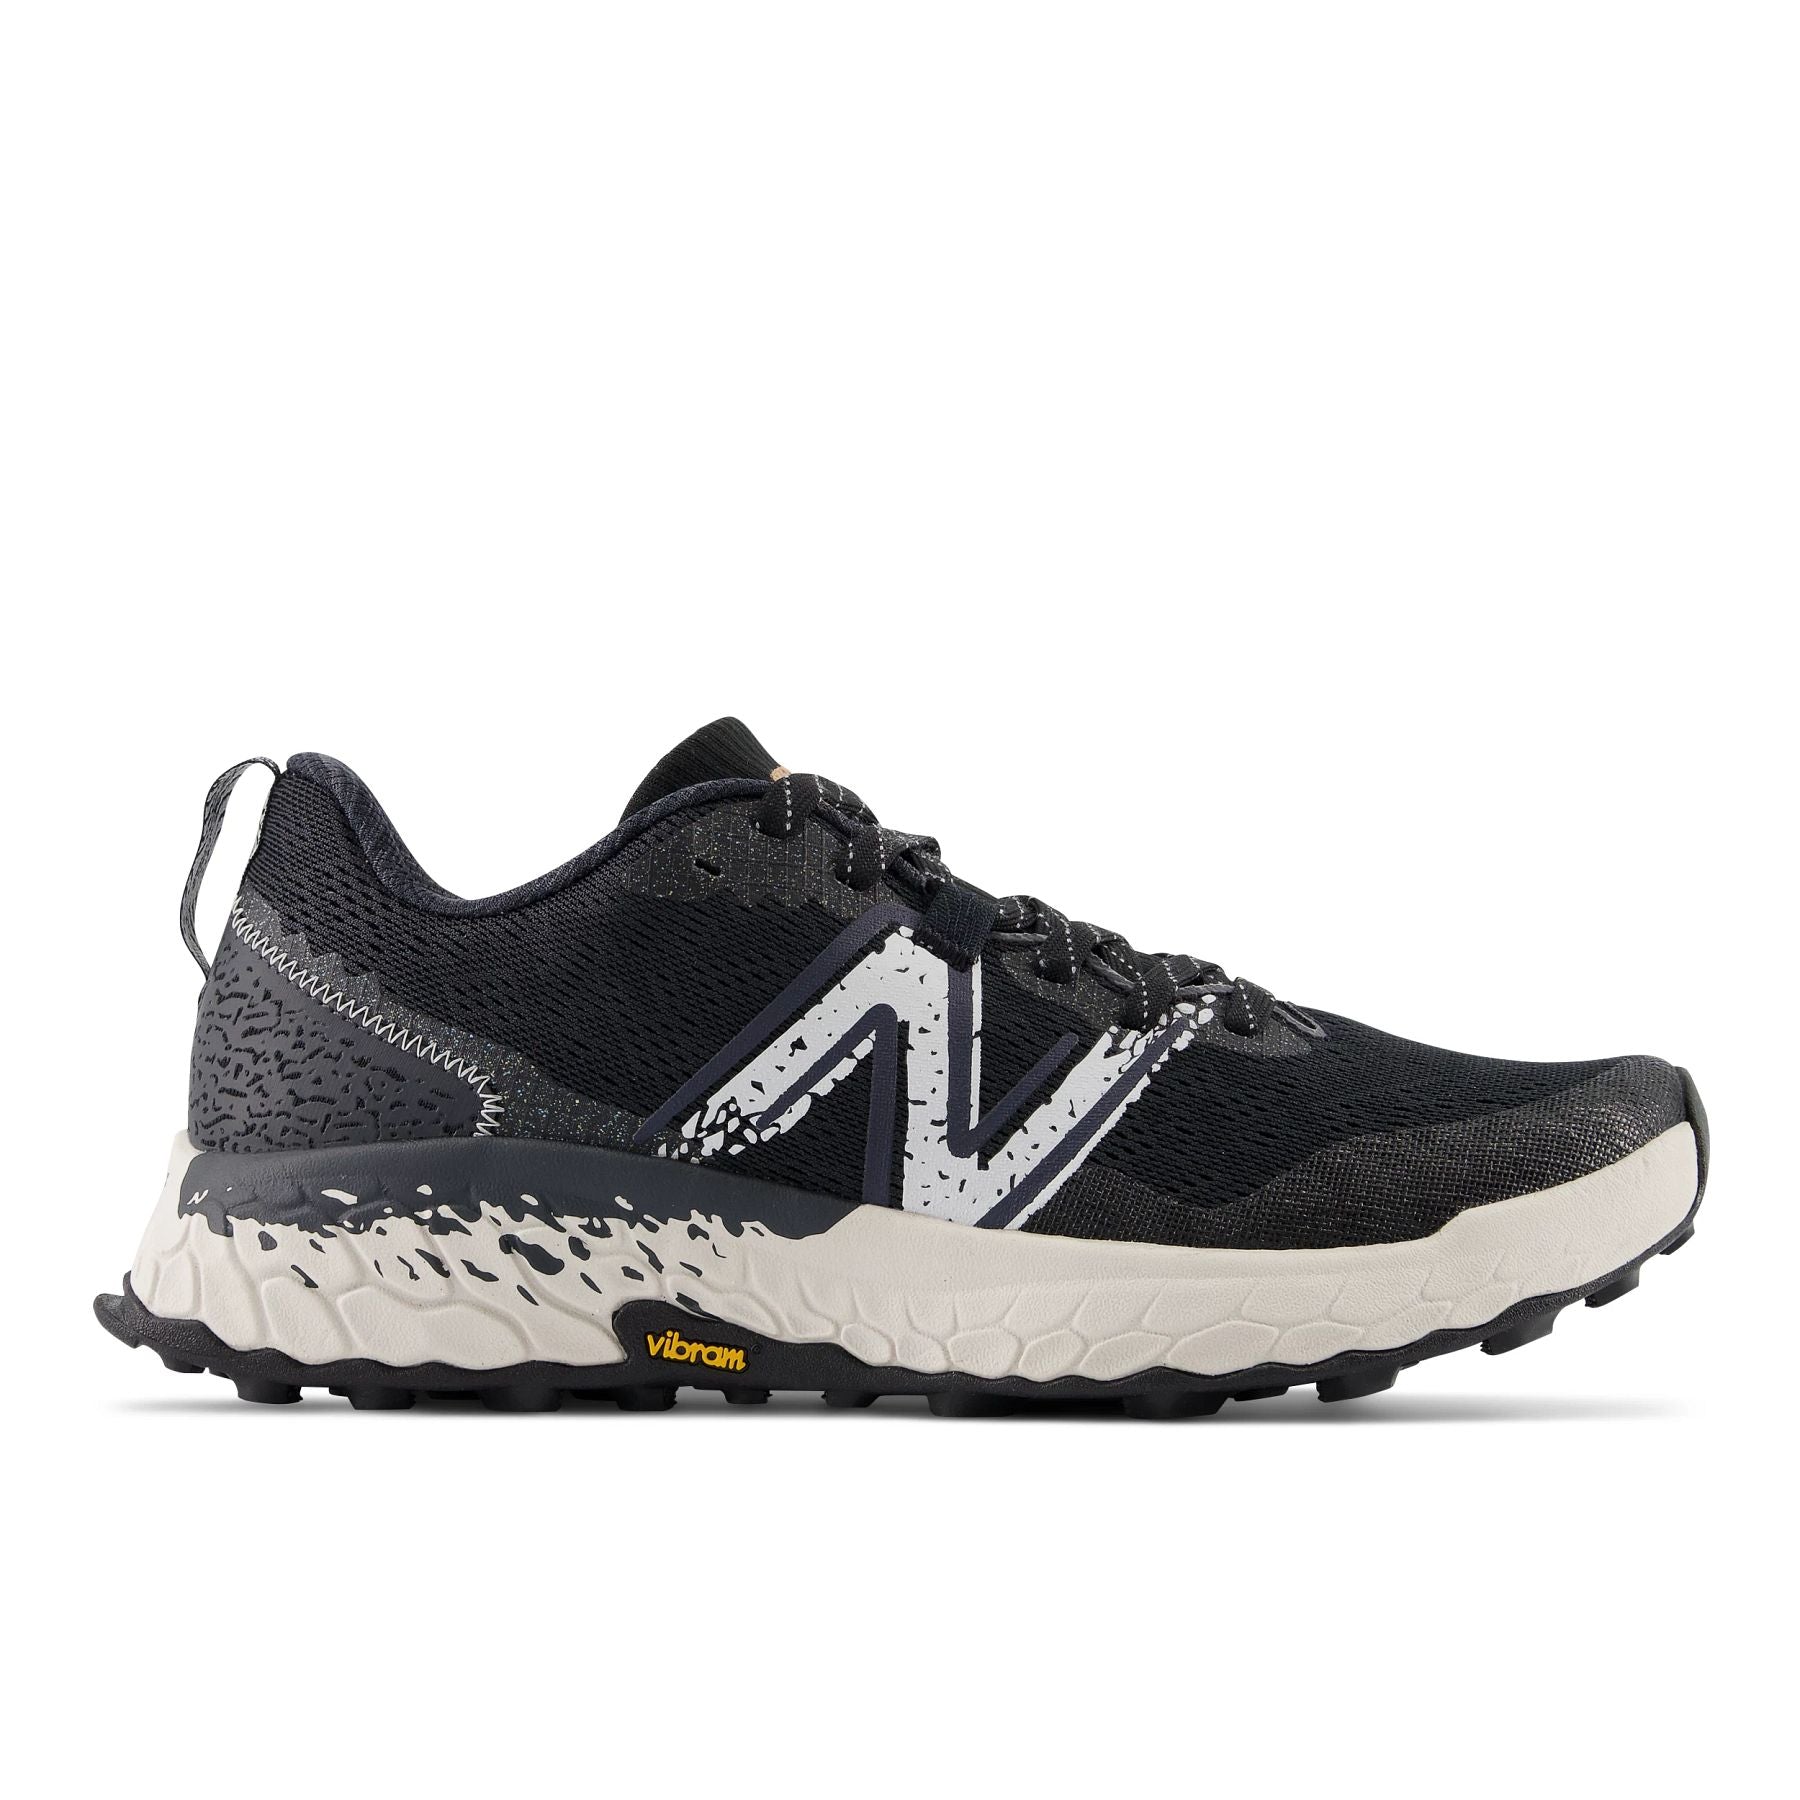 Lateral view of the Men's Hierro V7 trail shoe by New Balance in the color Black/Reflection